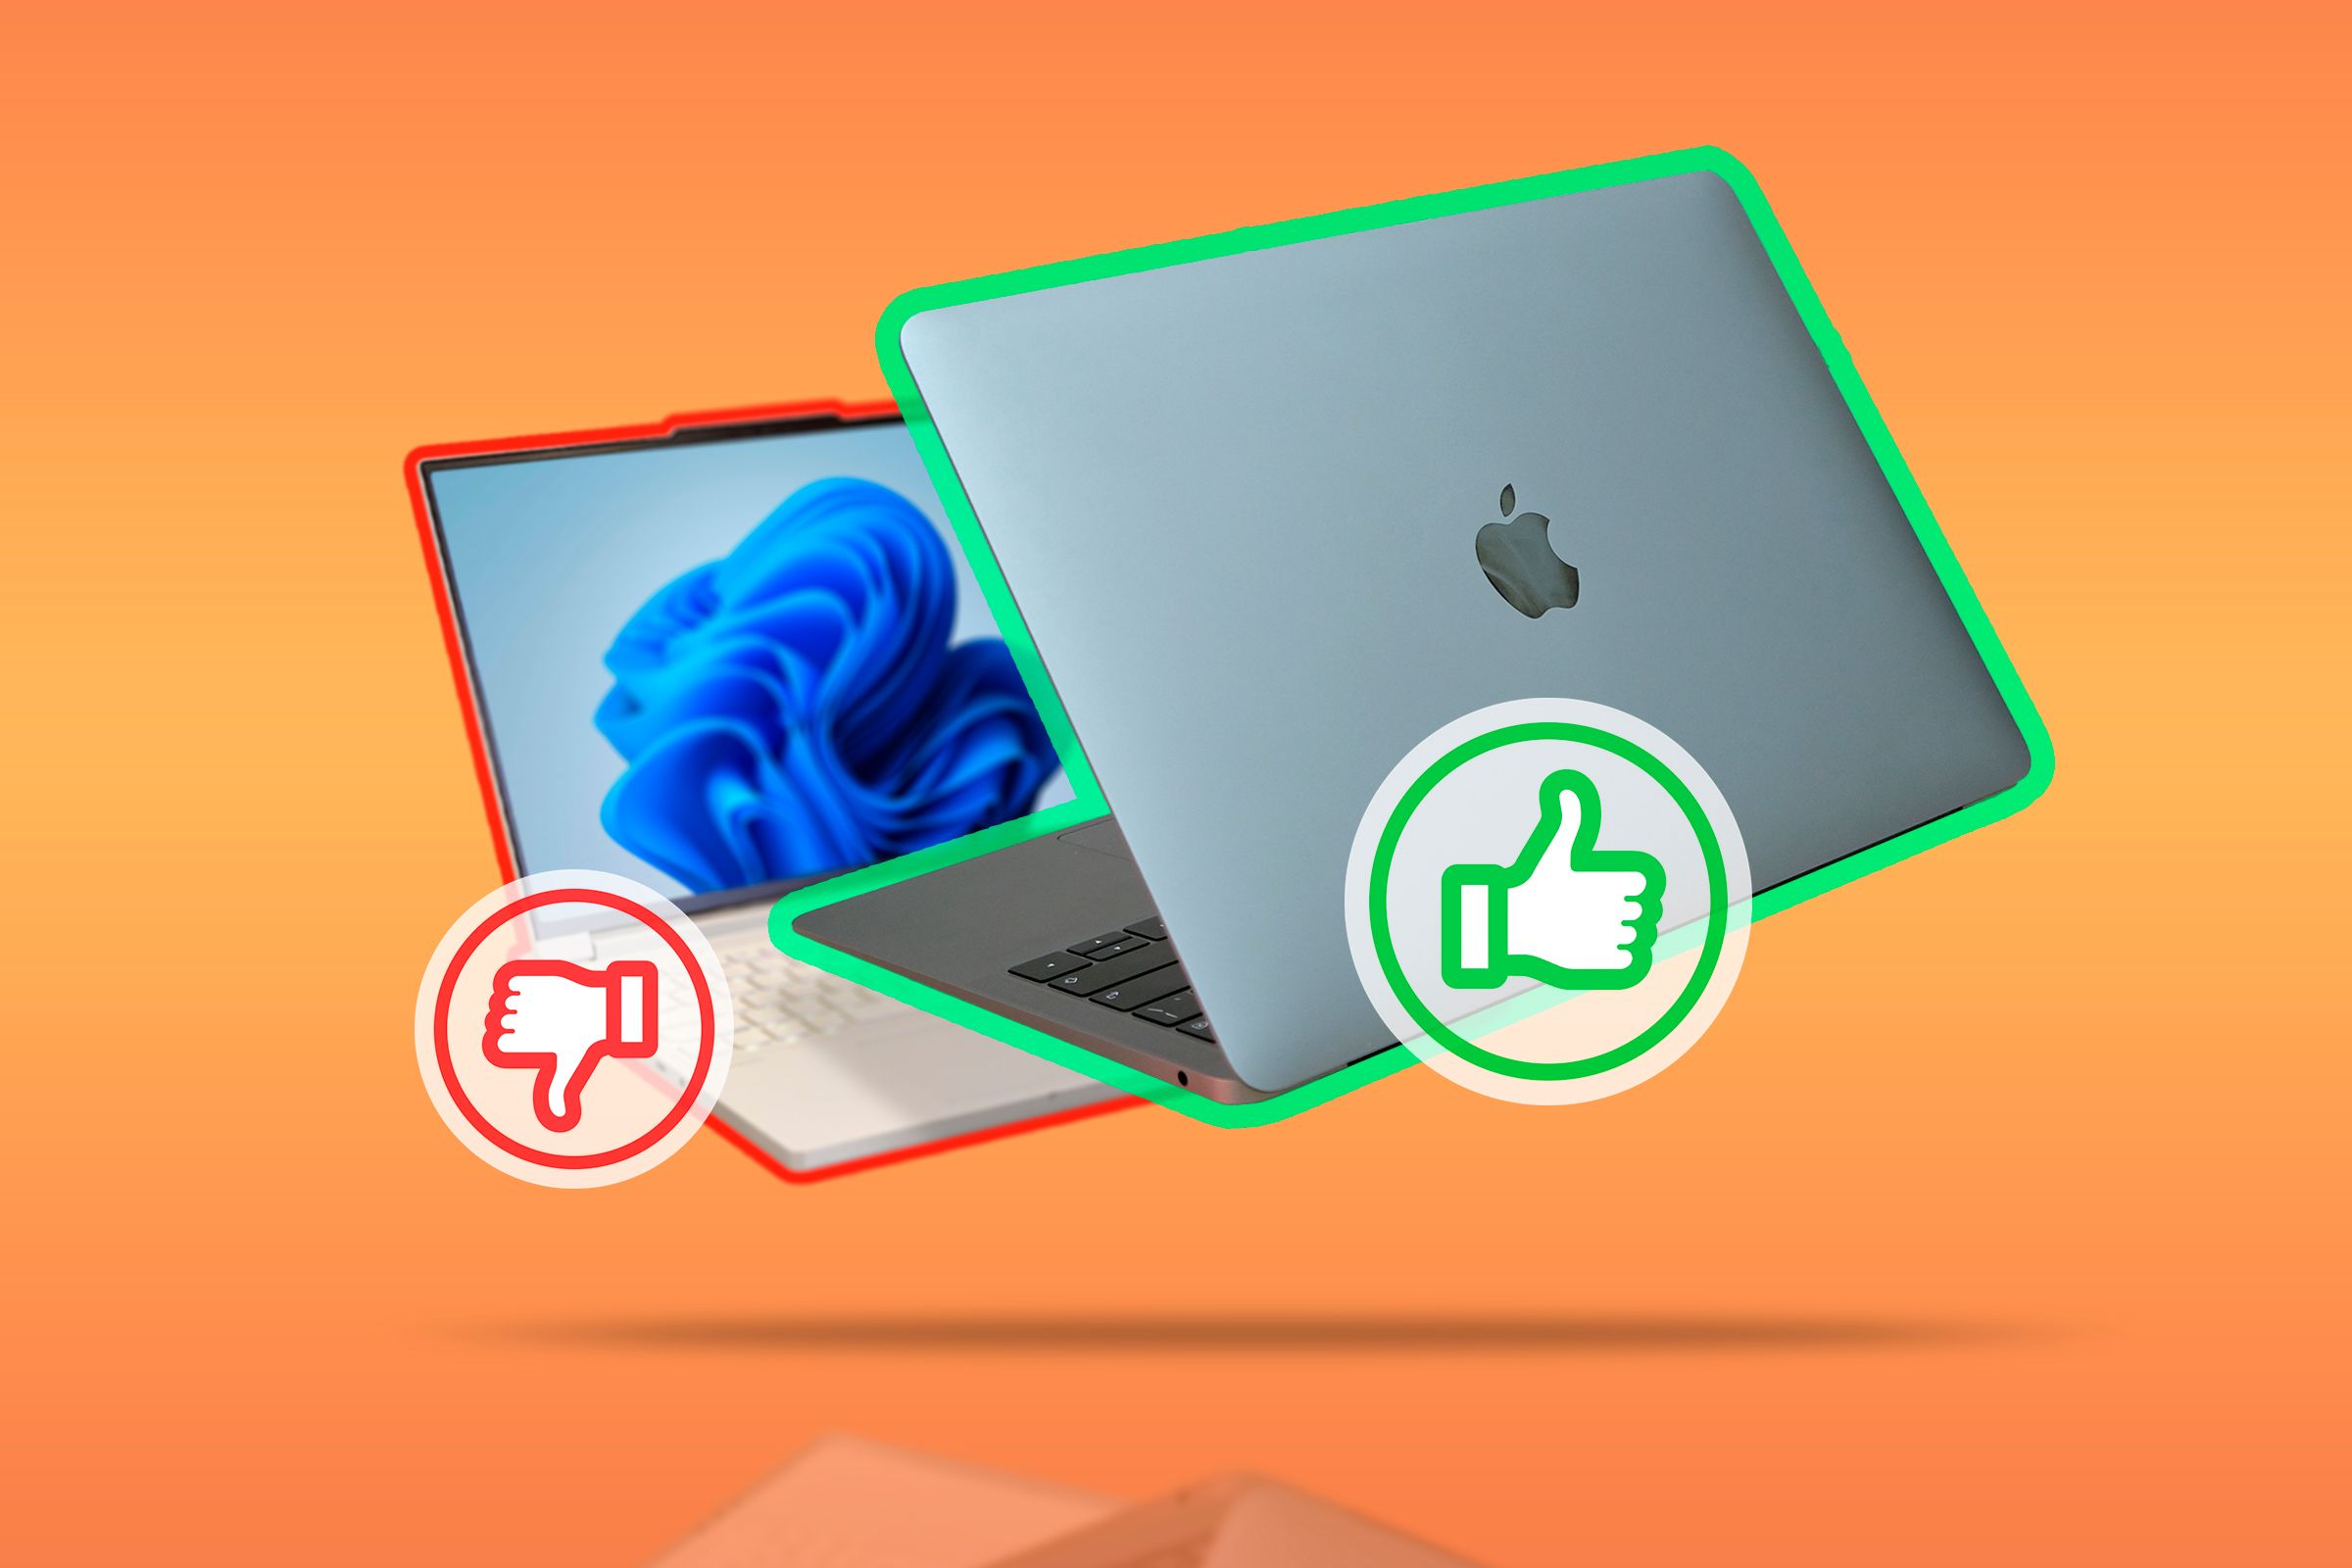 A MacBook with a thumbs-up icon, and behind it, a Windows laptop with a thumbs-down icon.